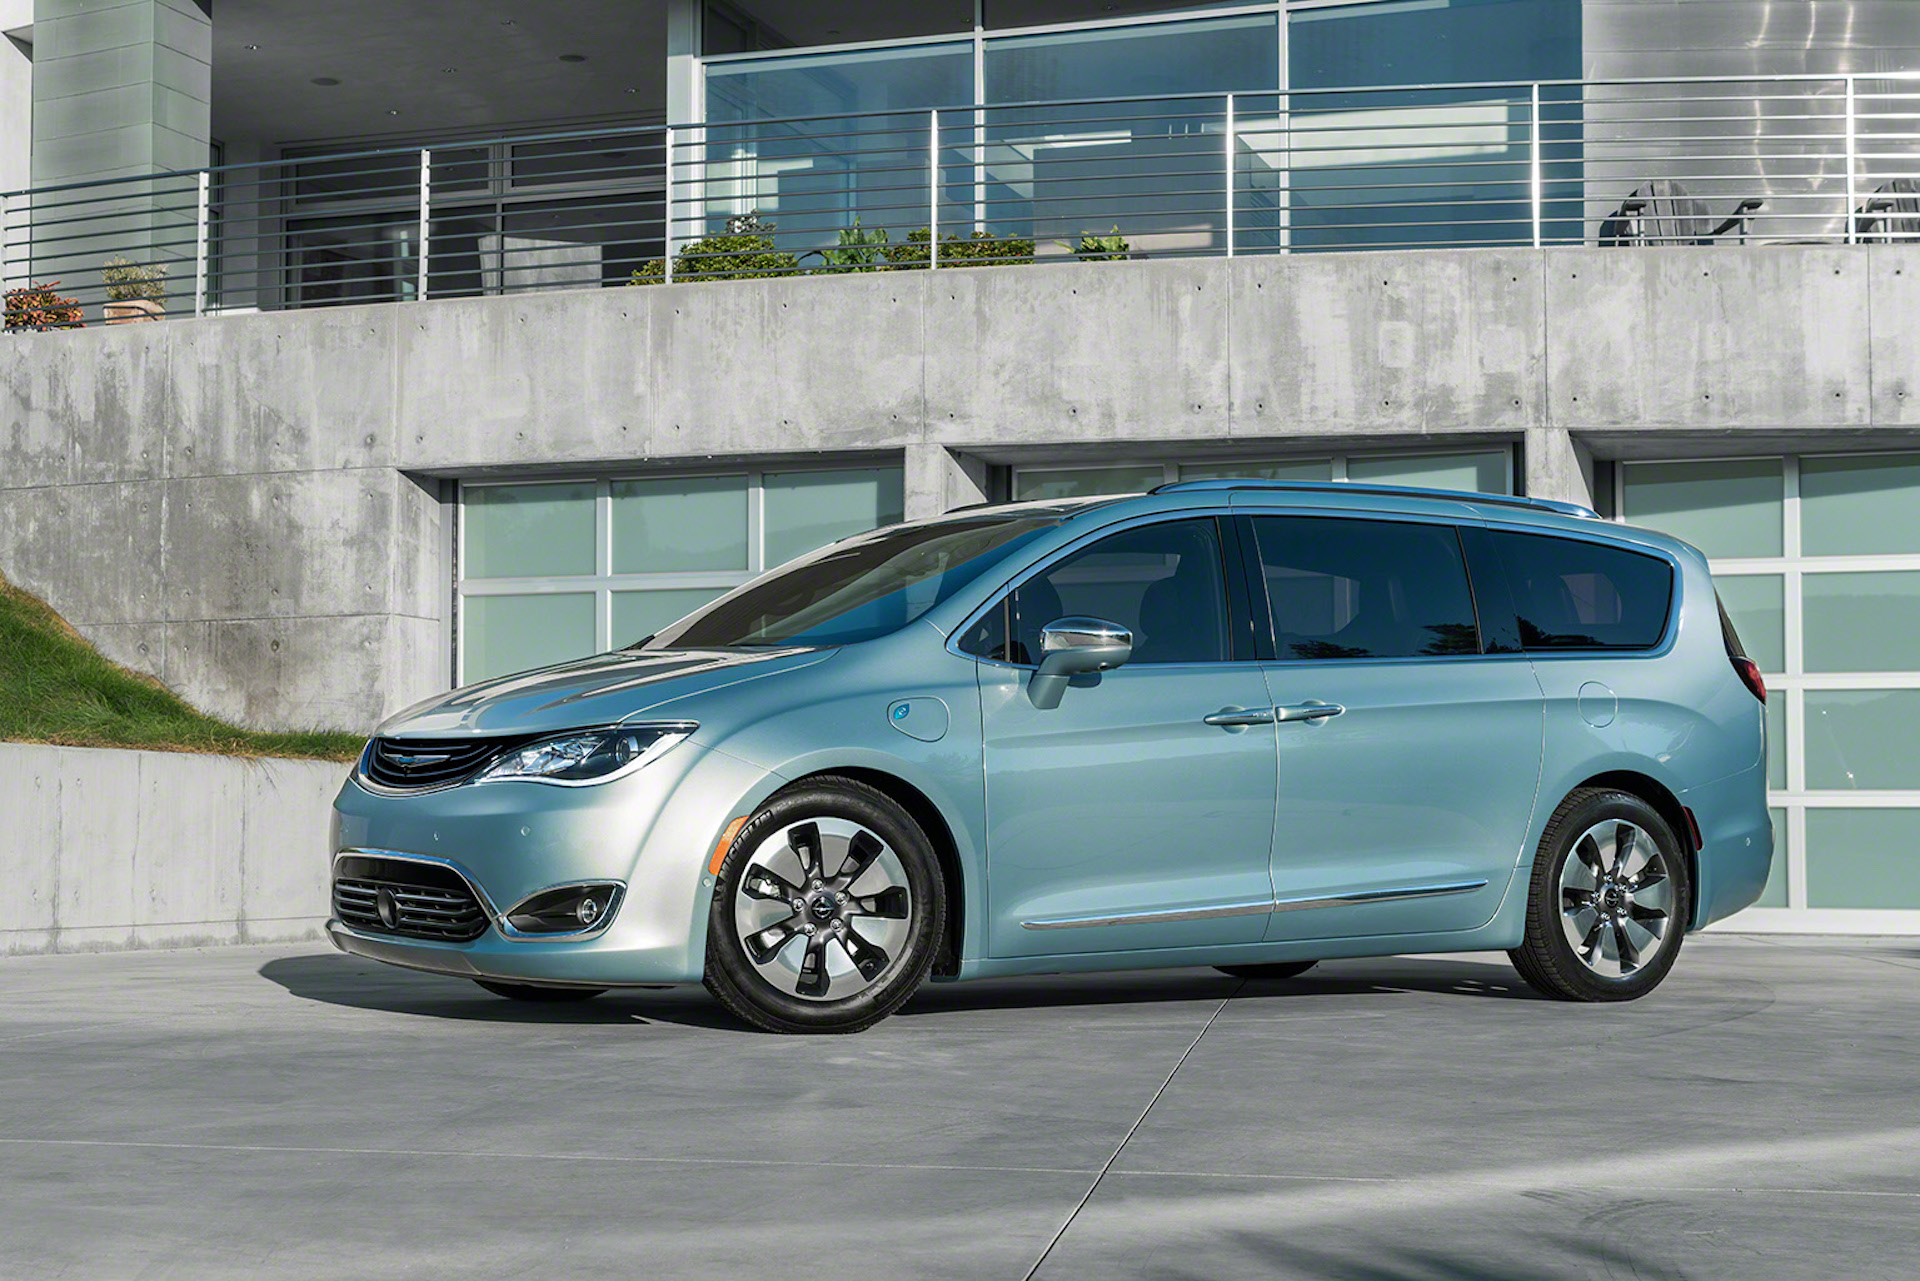 2017 Chrysler Pacifica Hybrid: More Details On 30-Mile Plug-In